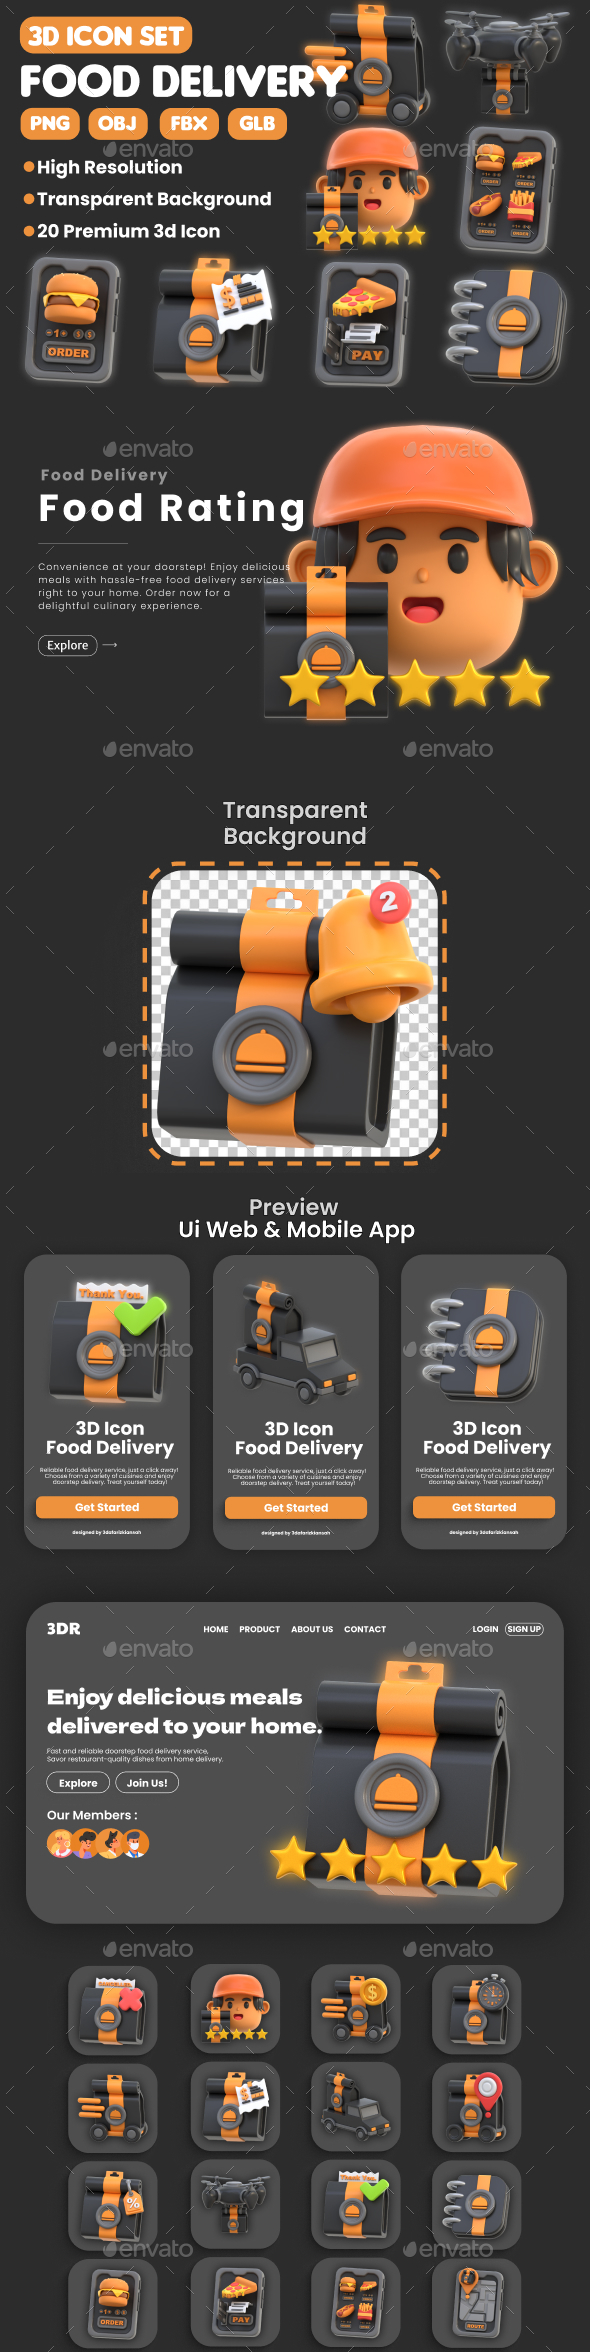 3D Food Delivery